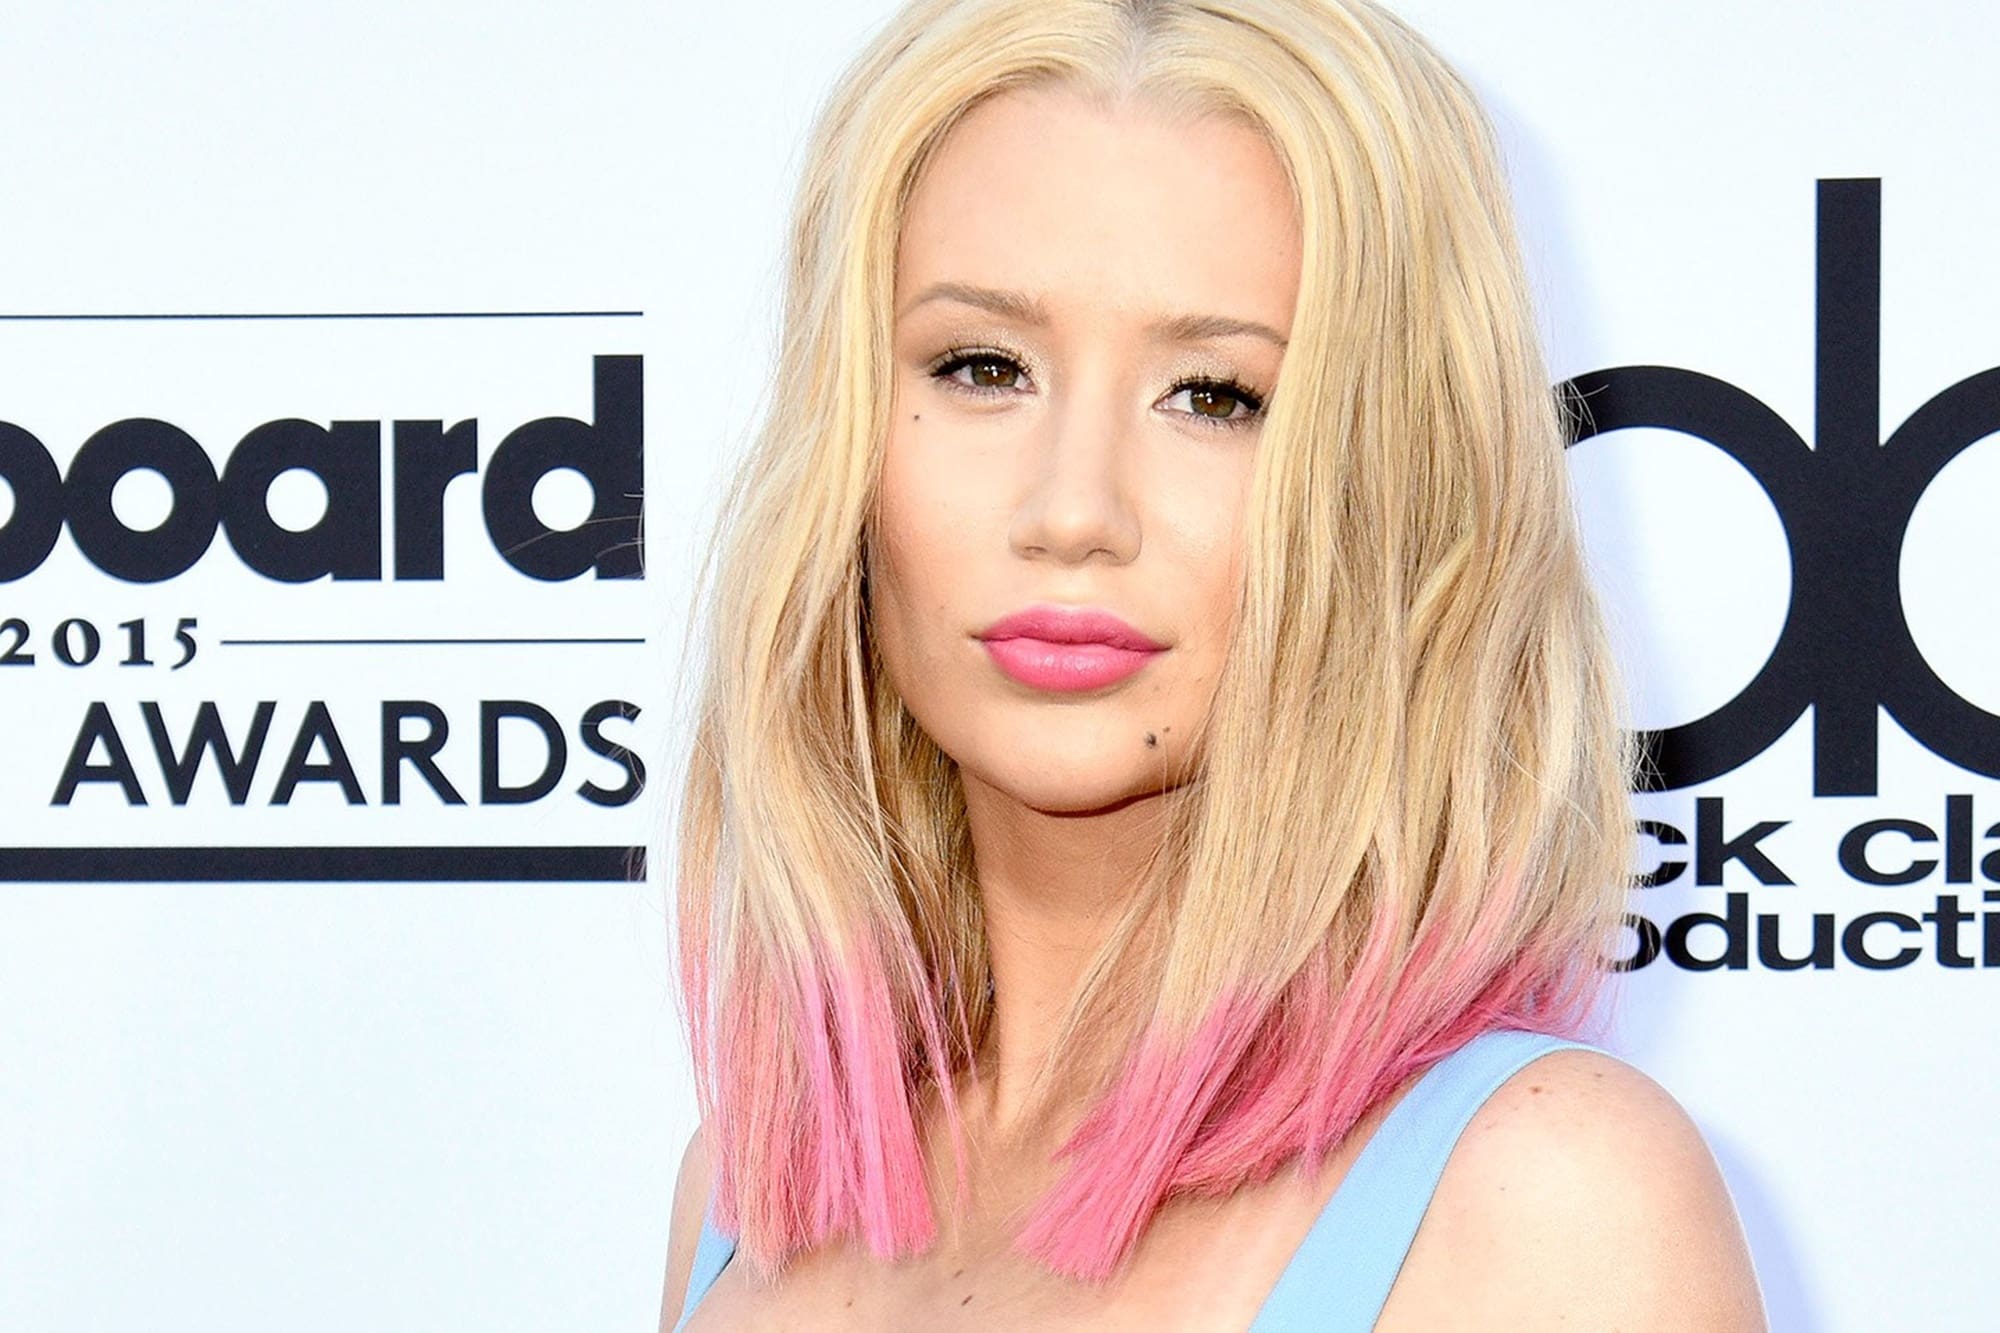 ”iggy-azaleas-private-gq-photos-leak-and-she-is-not-happy-about-it-here-is-what-the-rapper-intends-to-do-about-the-scandal”